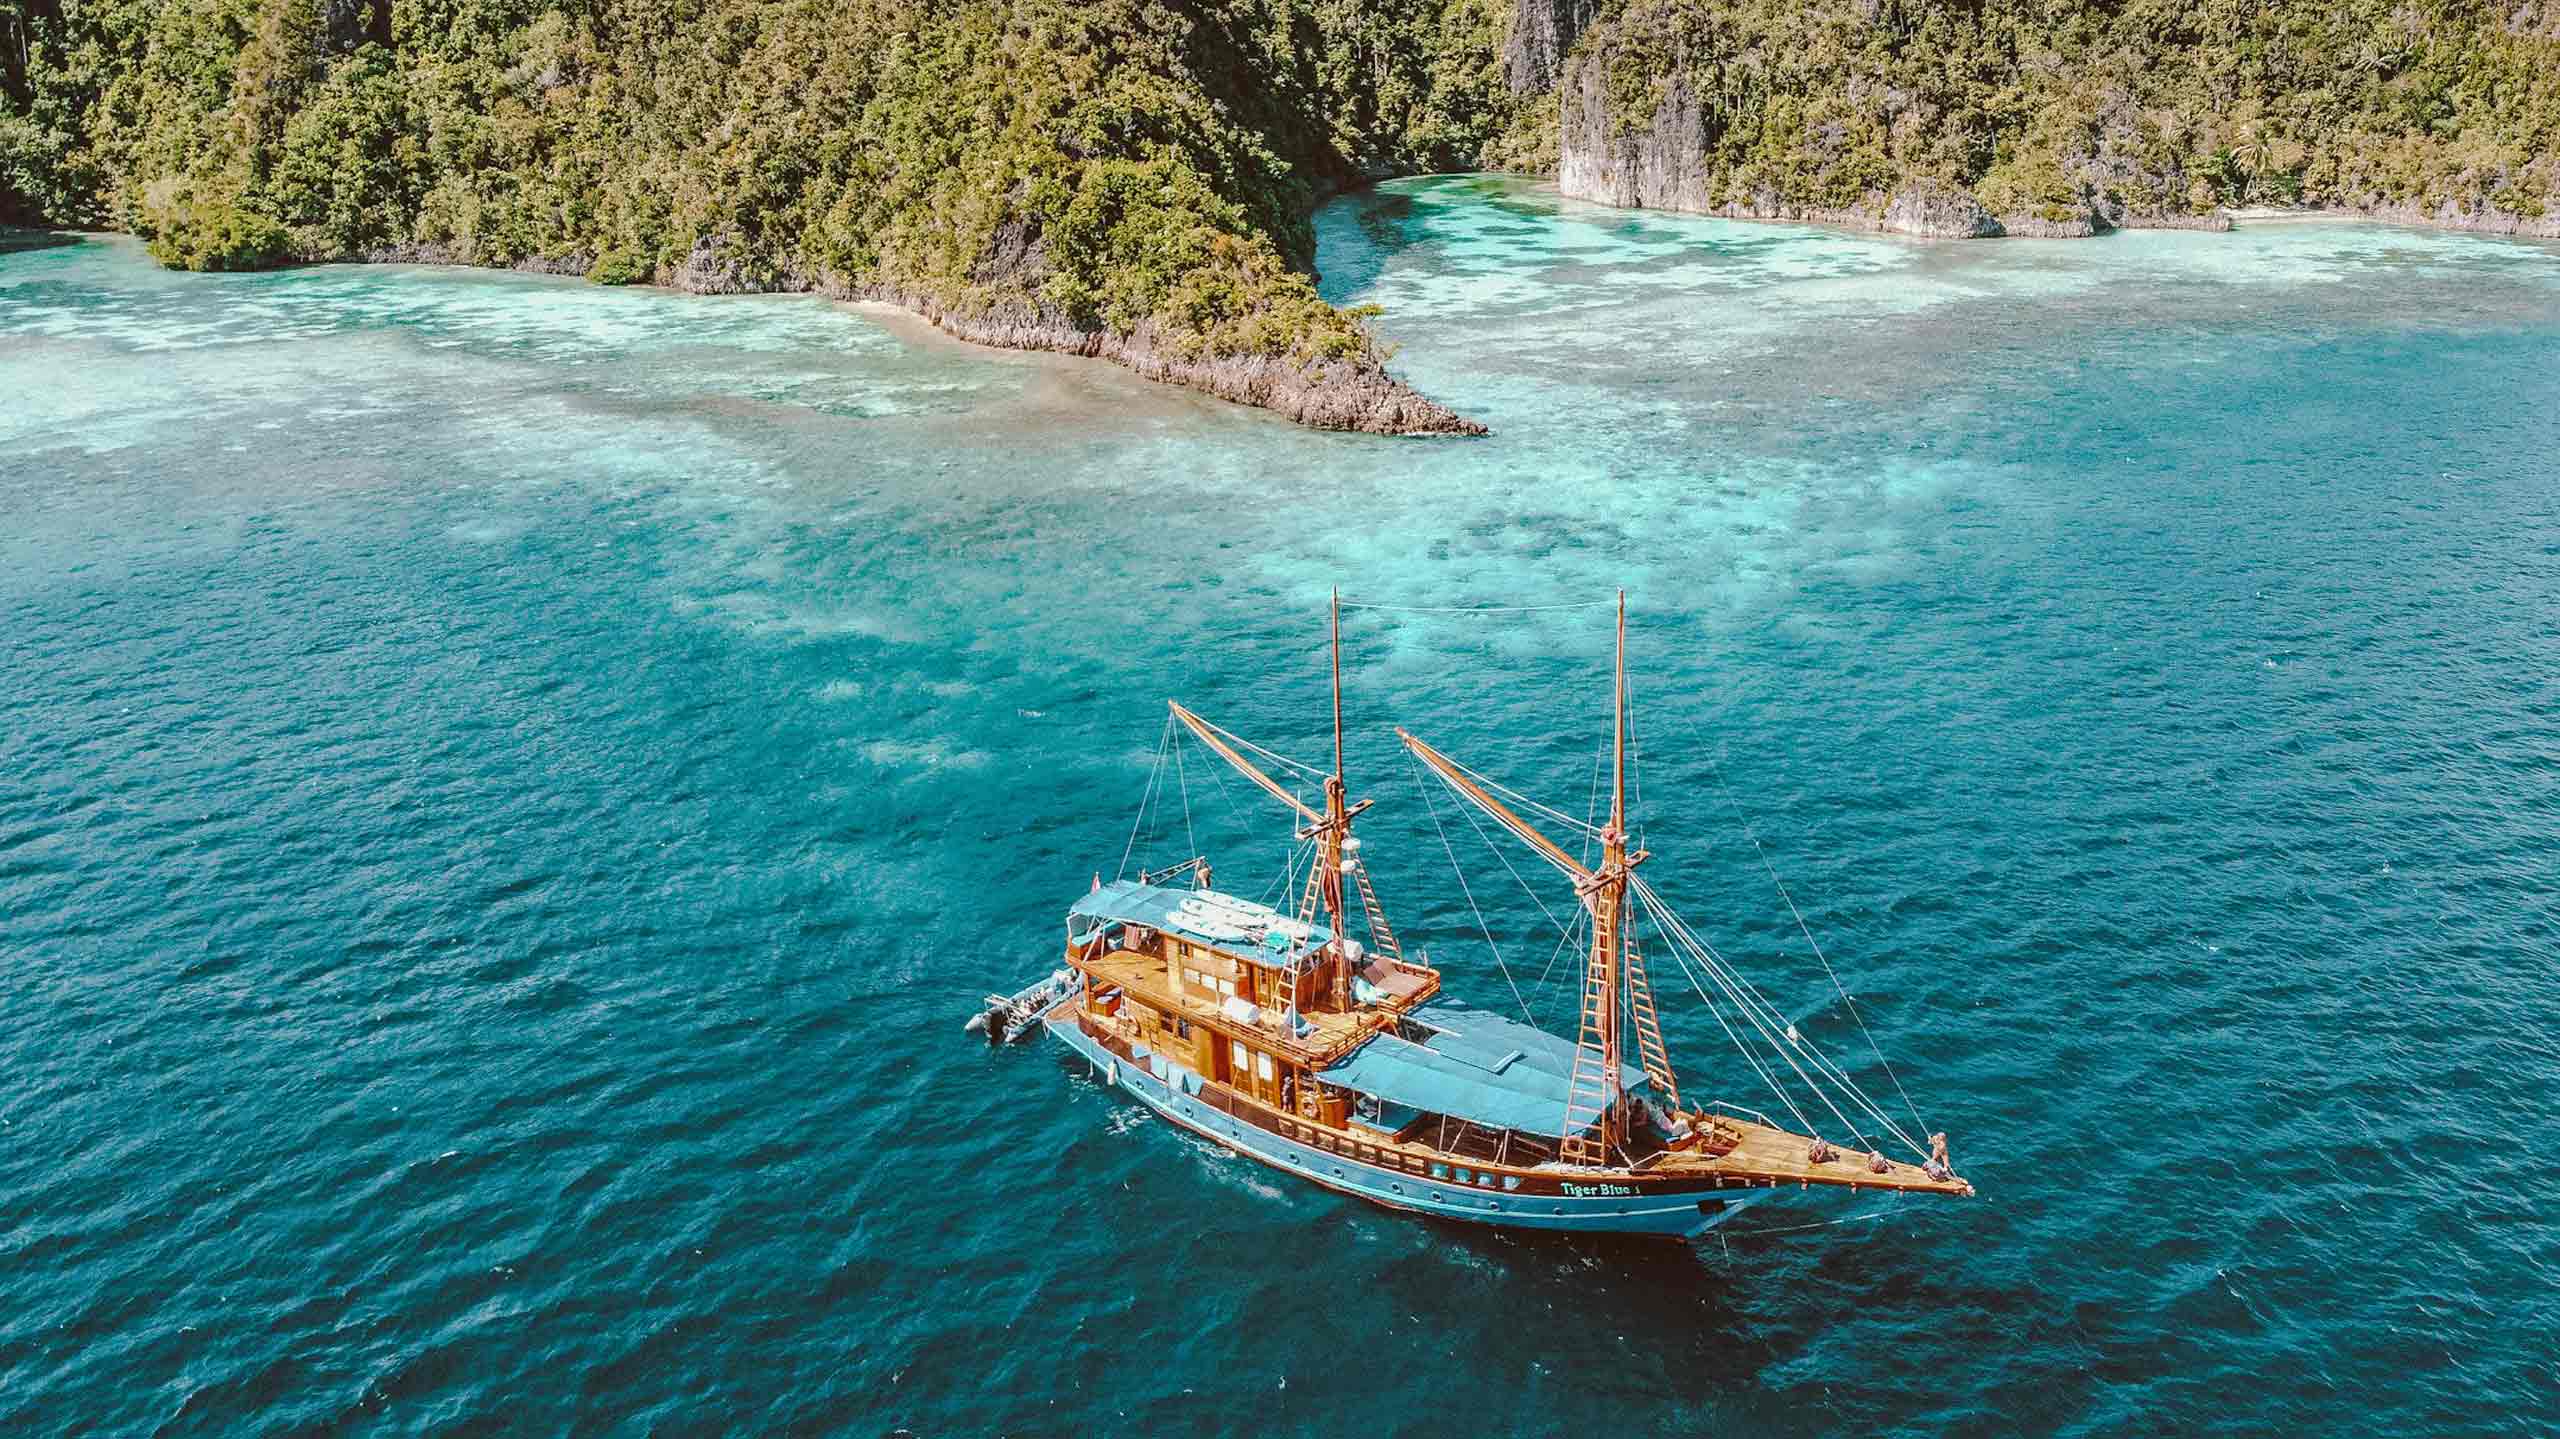 Phinisi Yacht in Indonesia